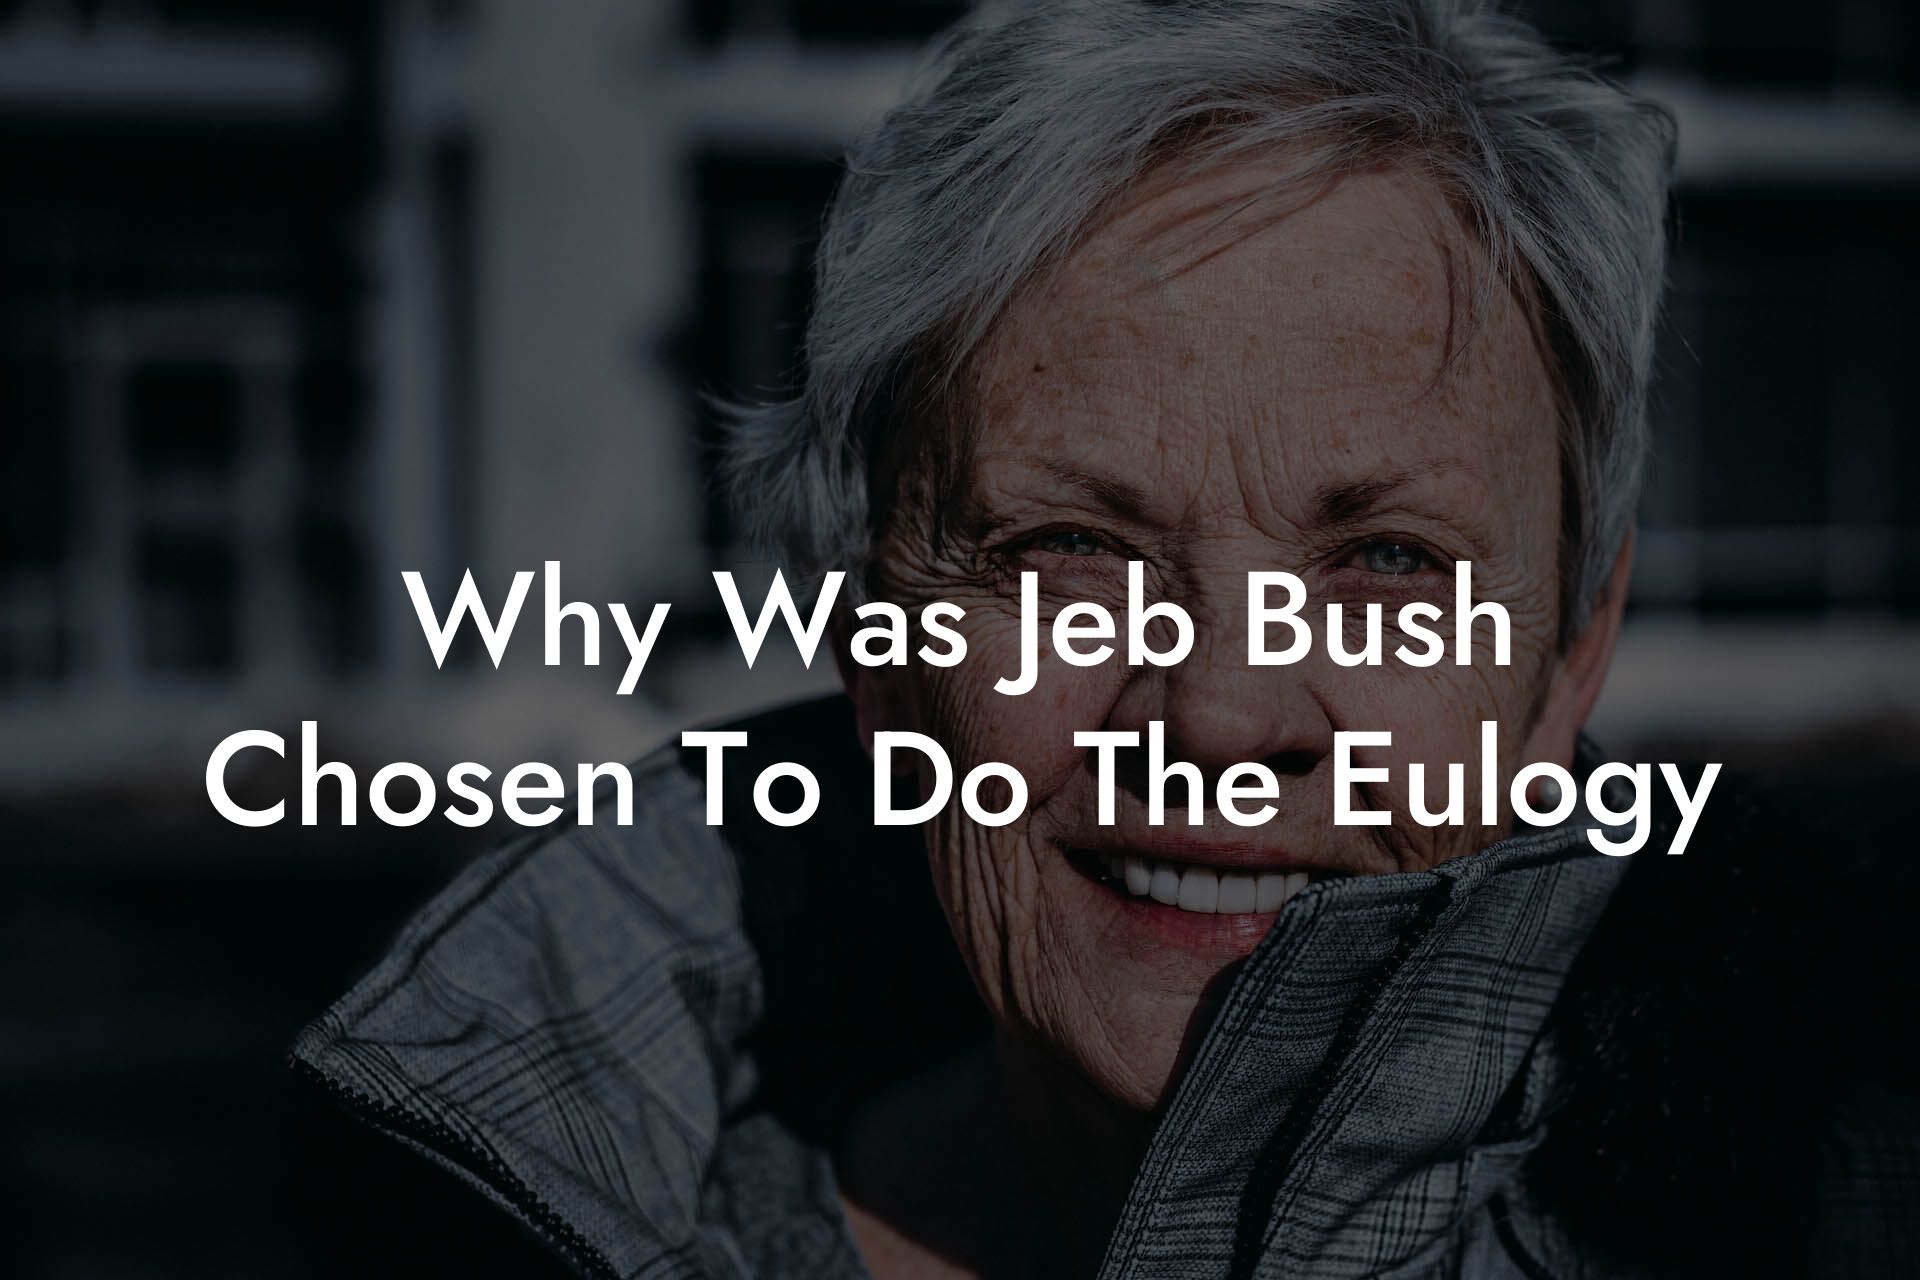 Why Was Jeb Bush Chosen To Do The Eulogy